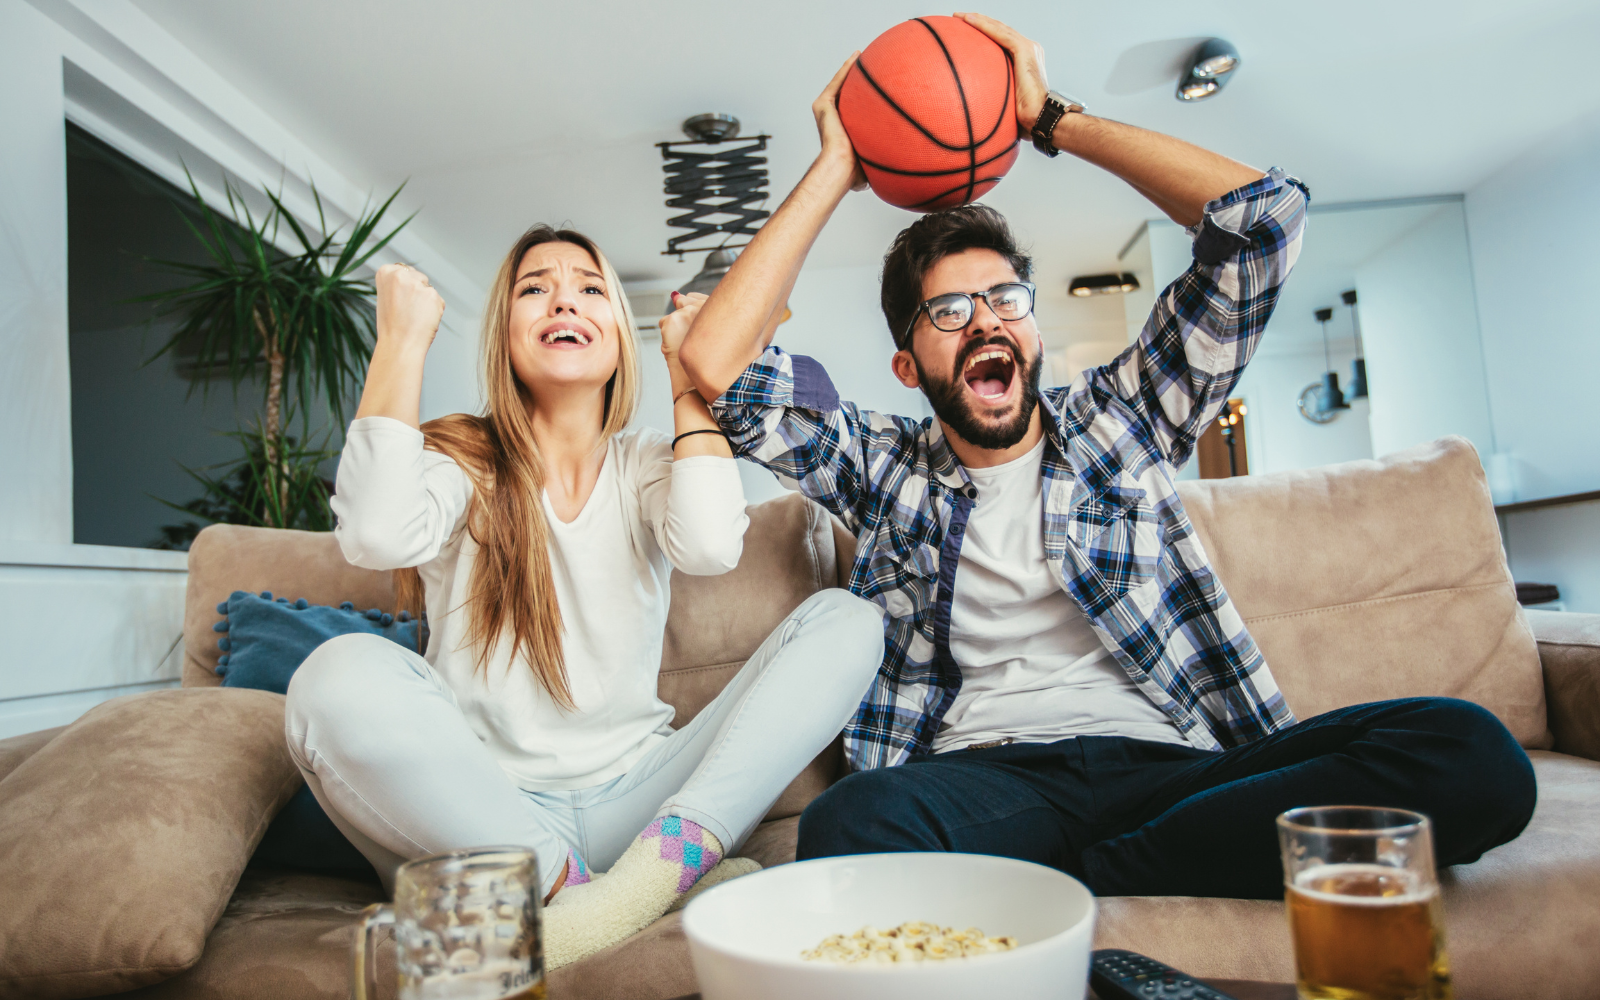 What Makes The Most Engaged YouTube Fans For NCAA Basketball (And Why Should You Care)? via @sejournal, @gregjarboe